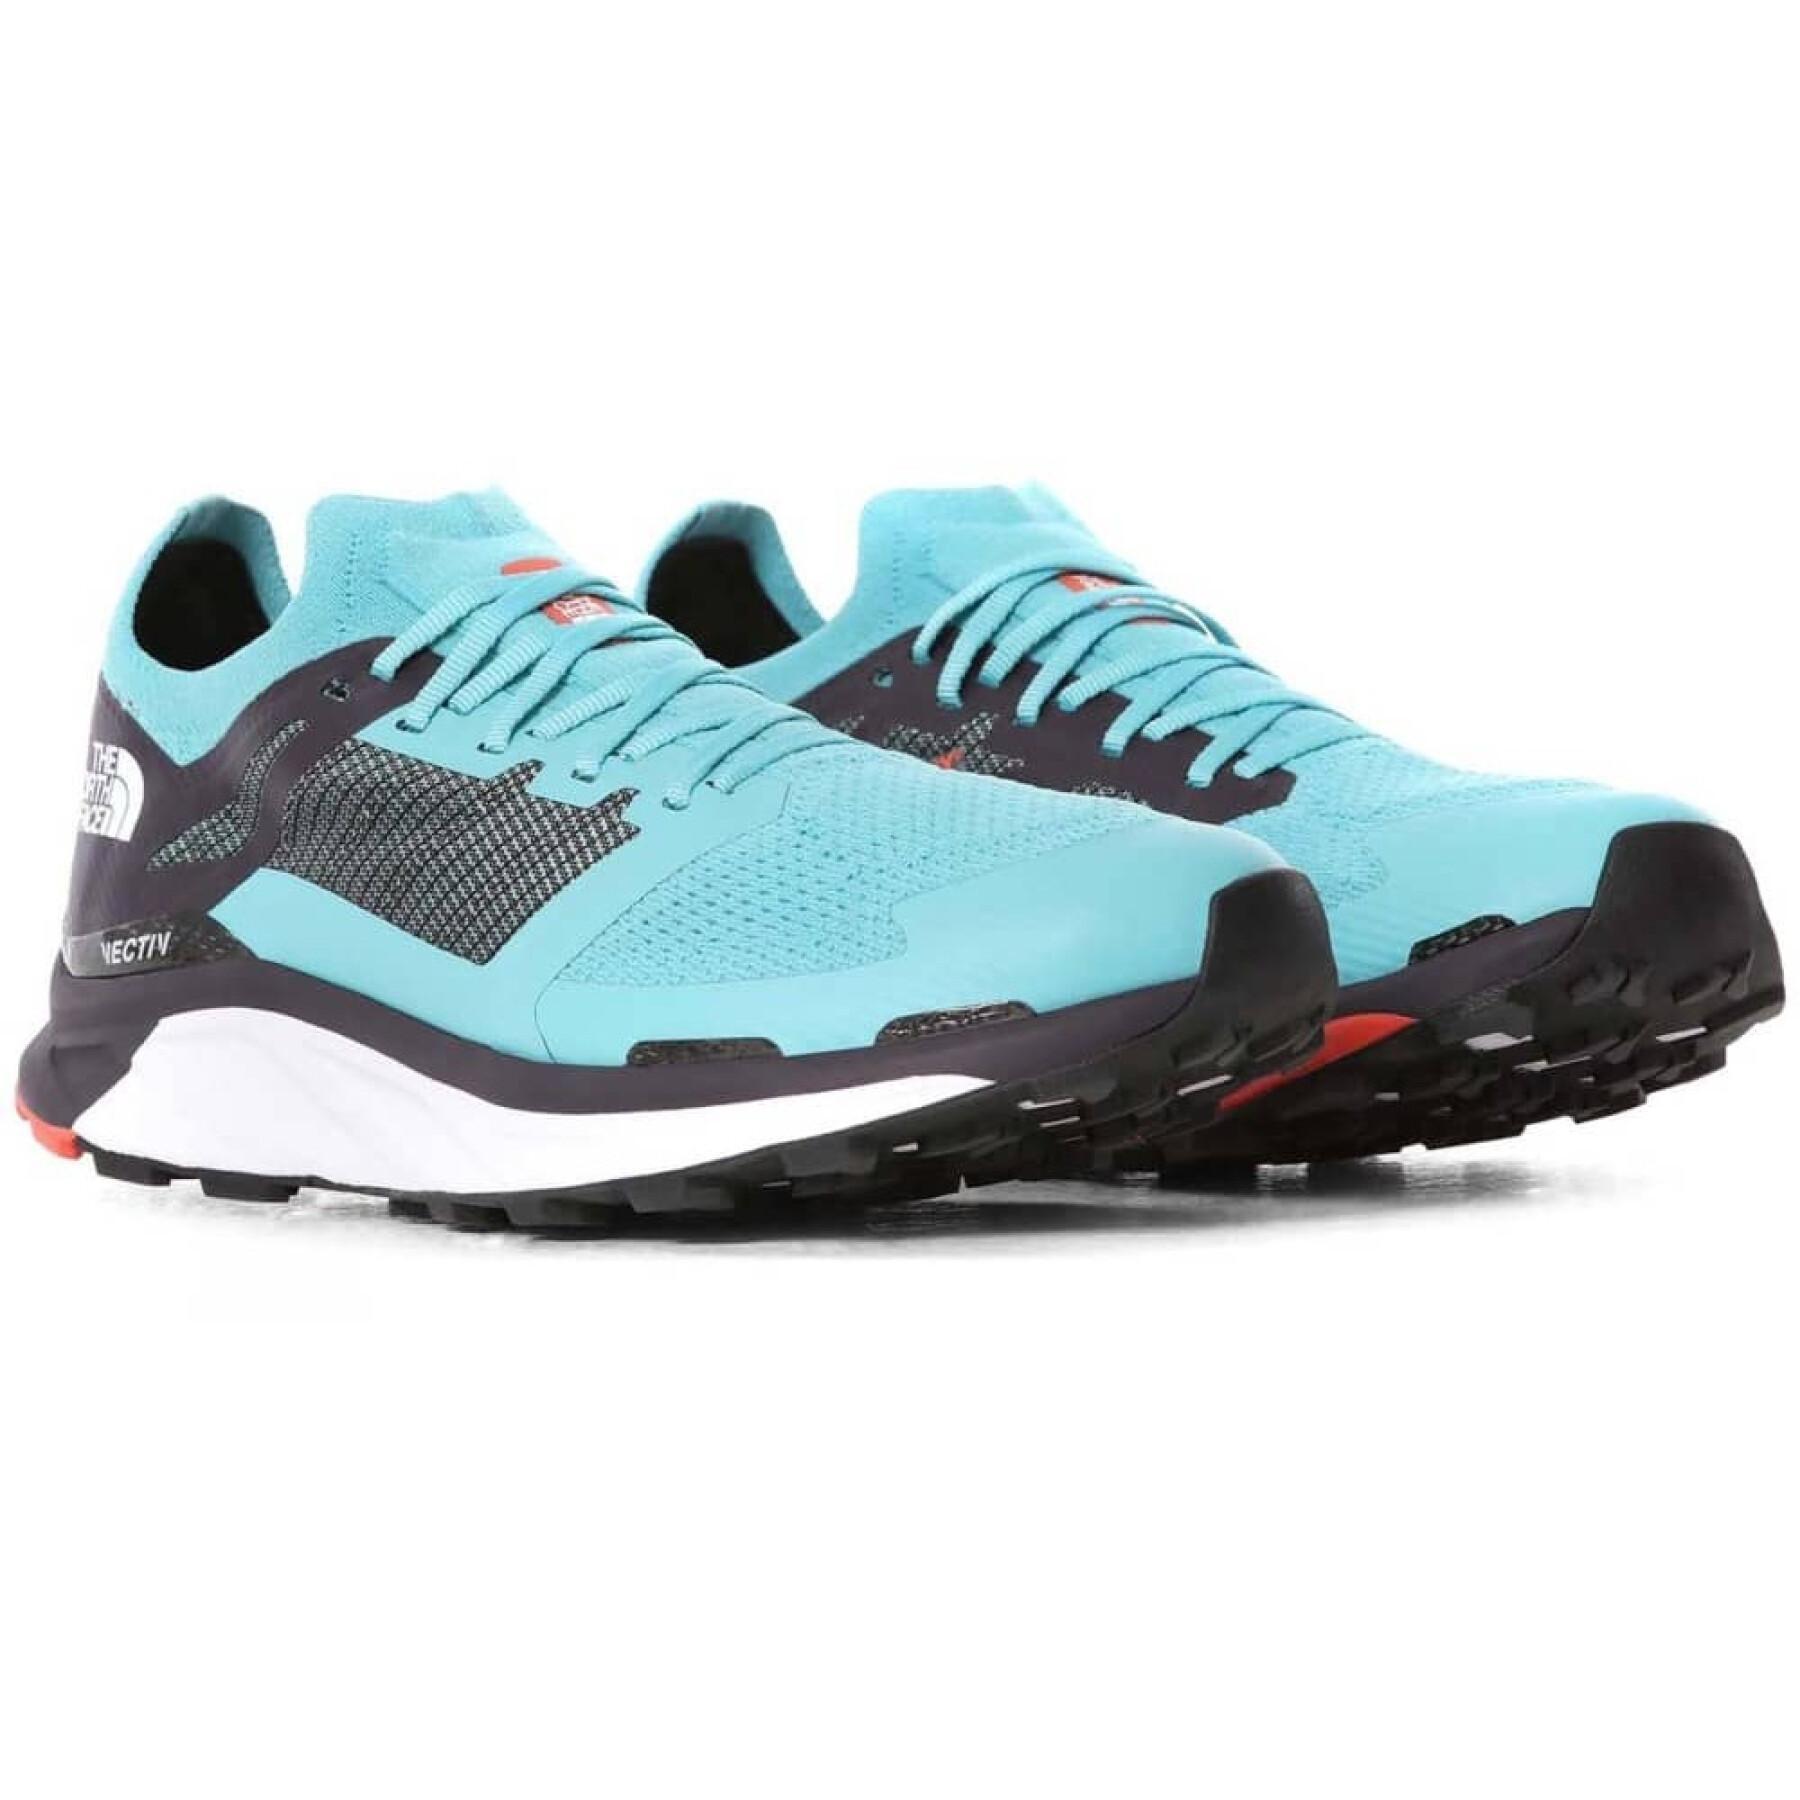 Women's trail shoes The North Face Vectiv Taraval Street